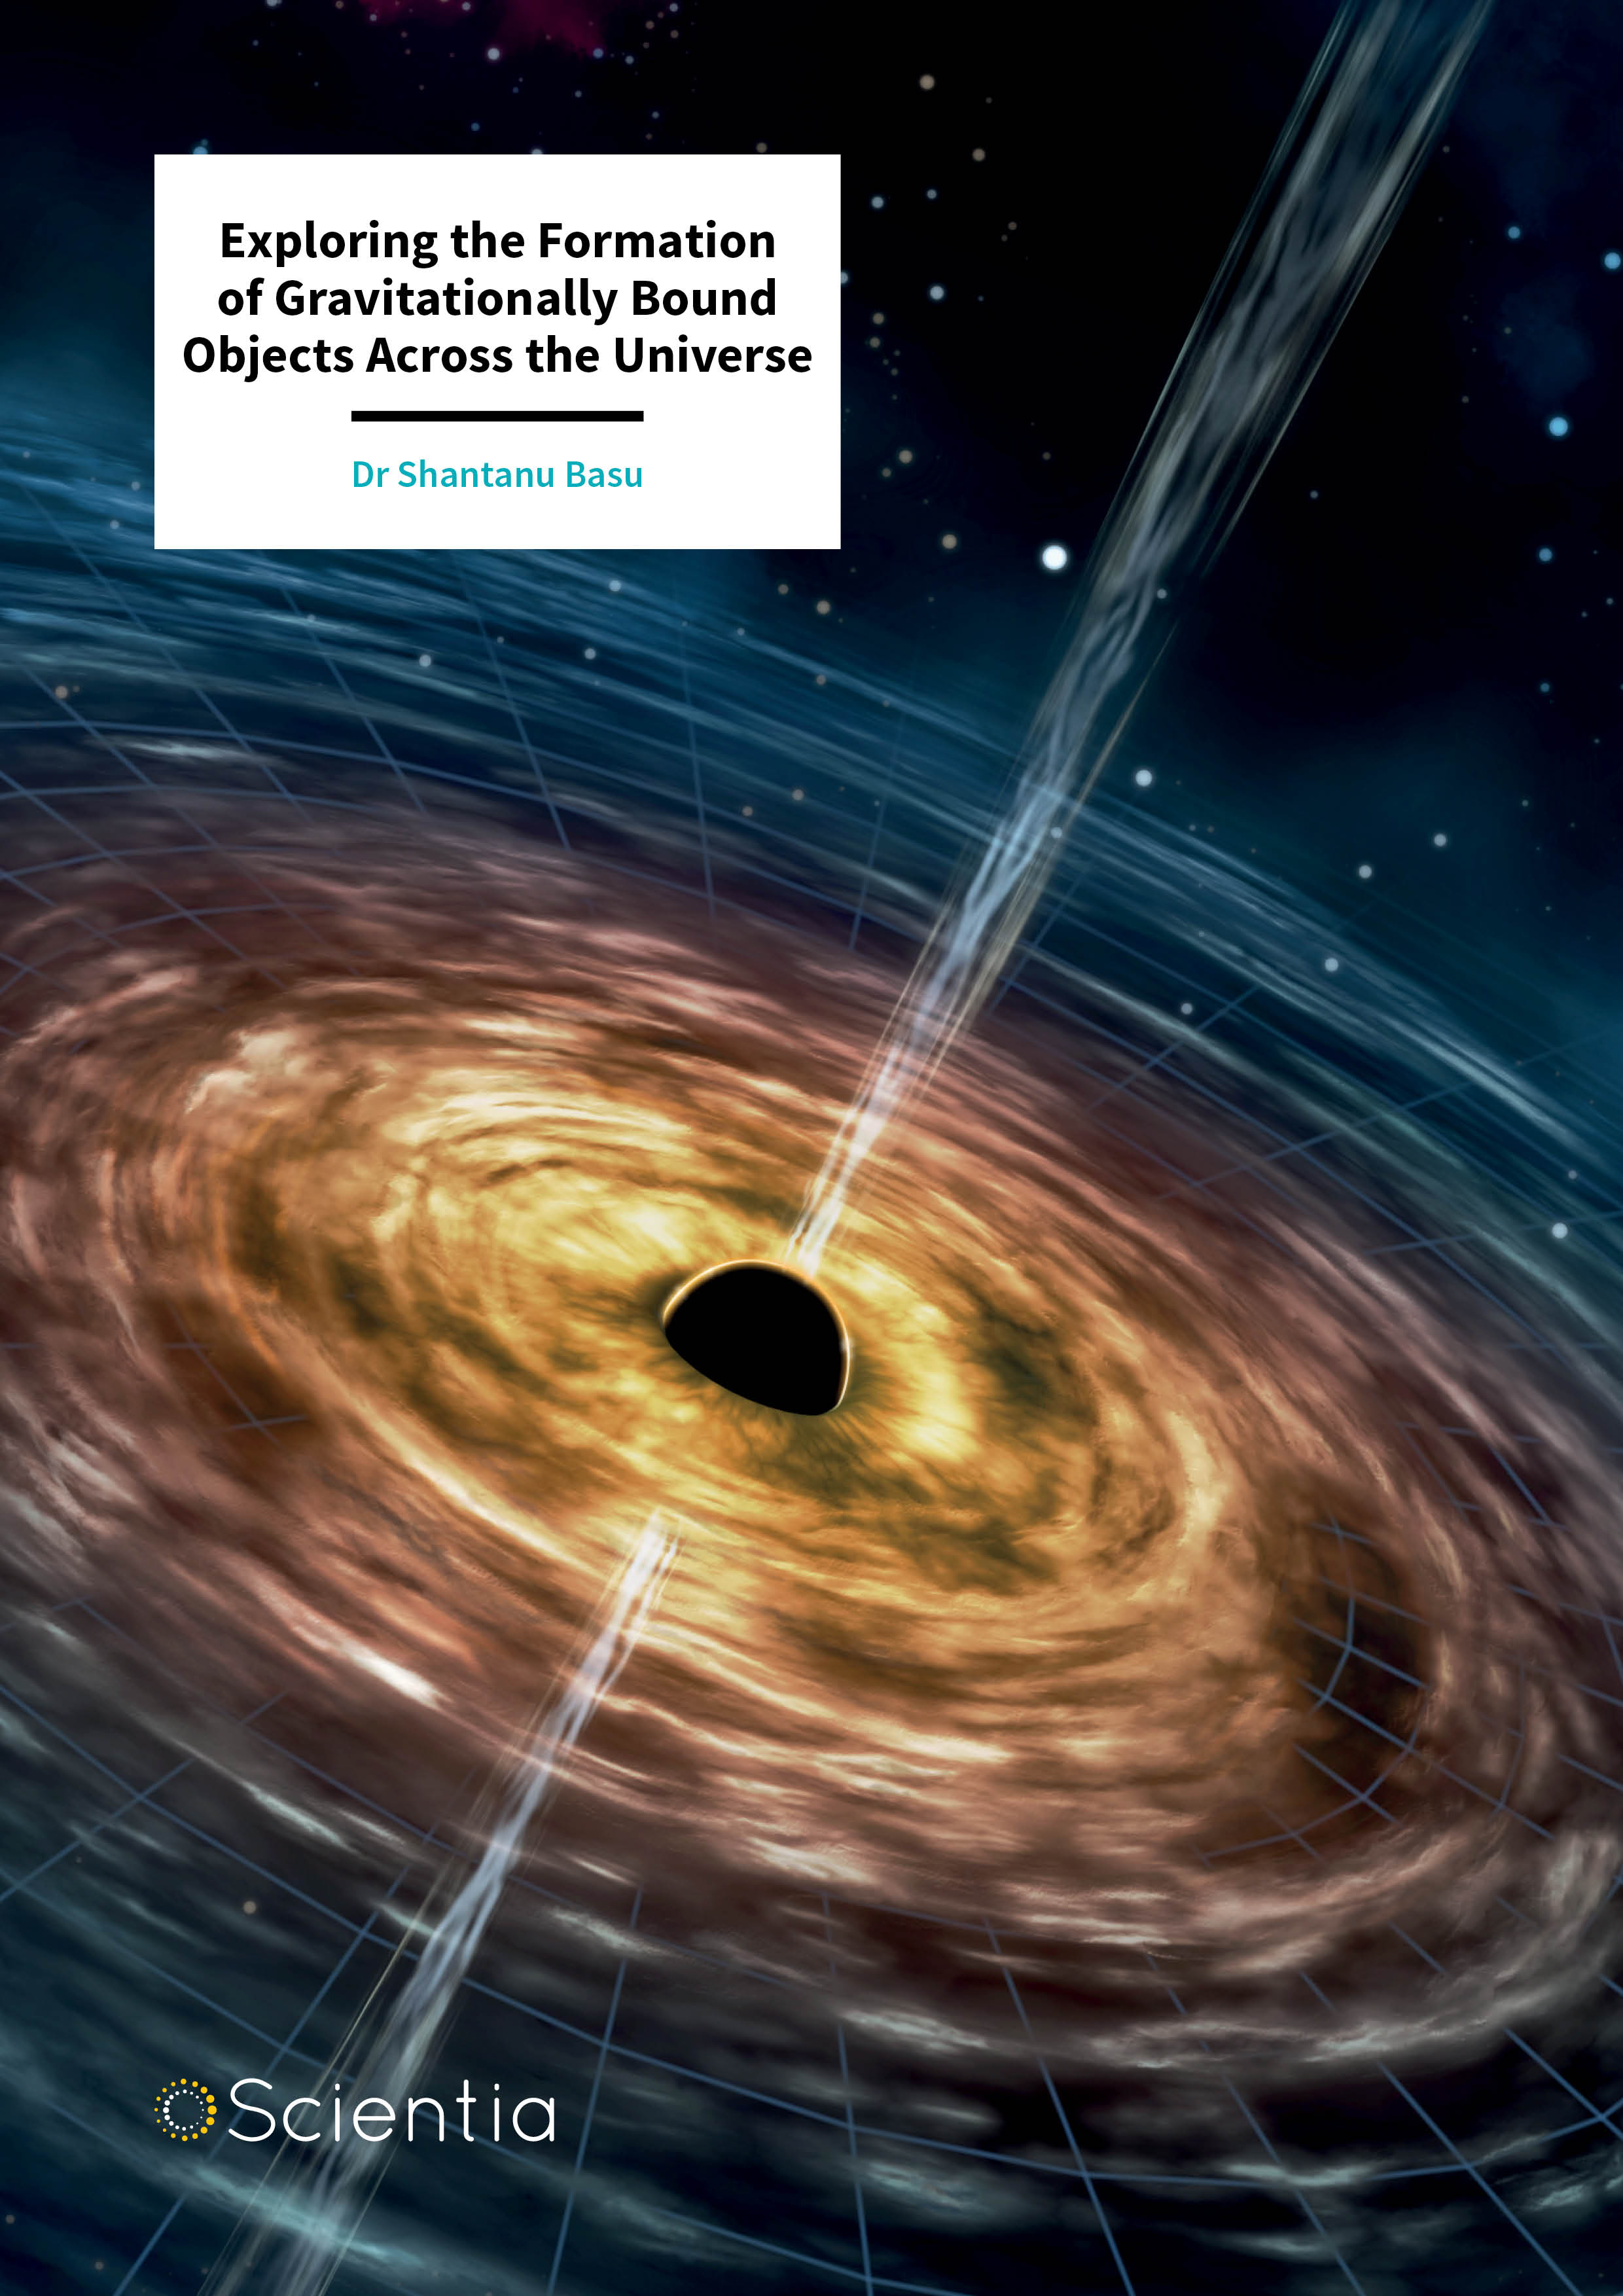 Dr Shantanu Basu – Exploring the Formation of Gravitationally Bound Objects Across the Universe